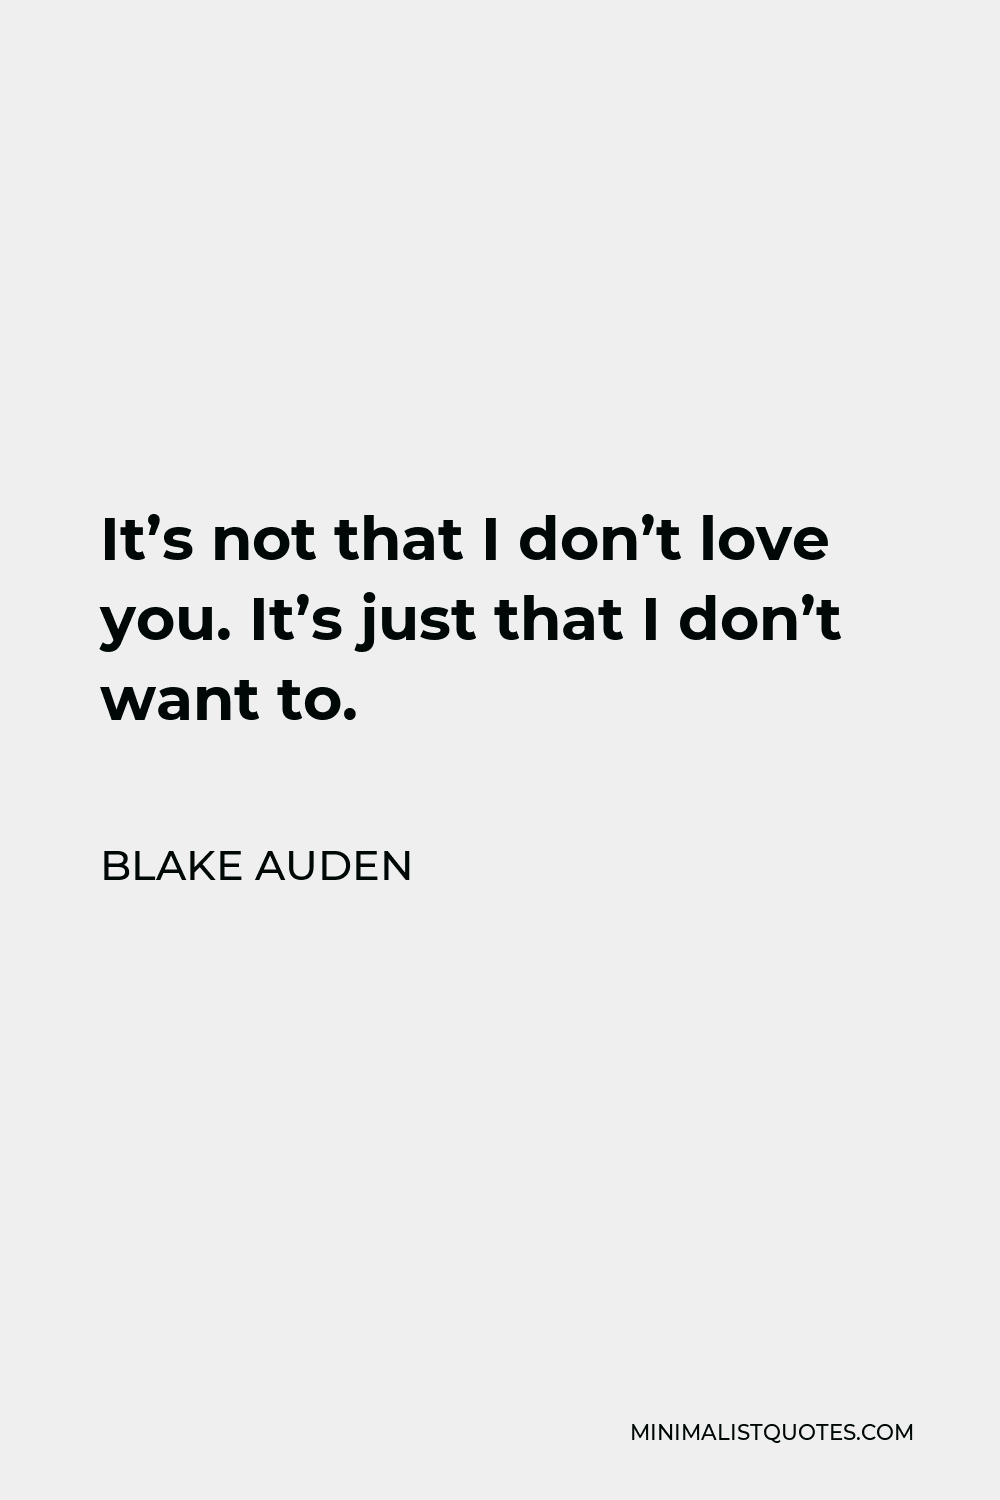 Blake Auden Quote - It’s not that I don’t love you. It’s just that I don’t want to.